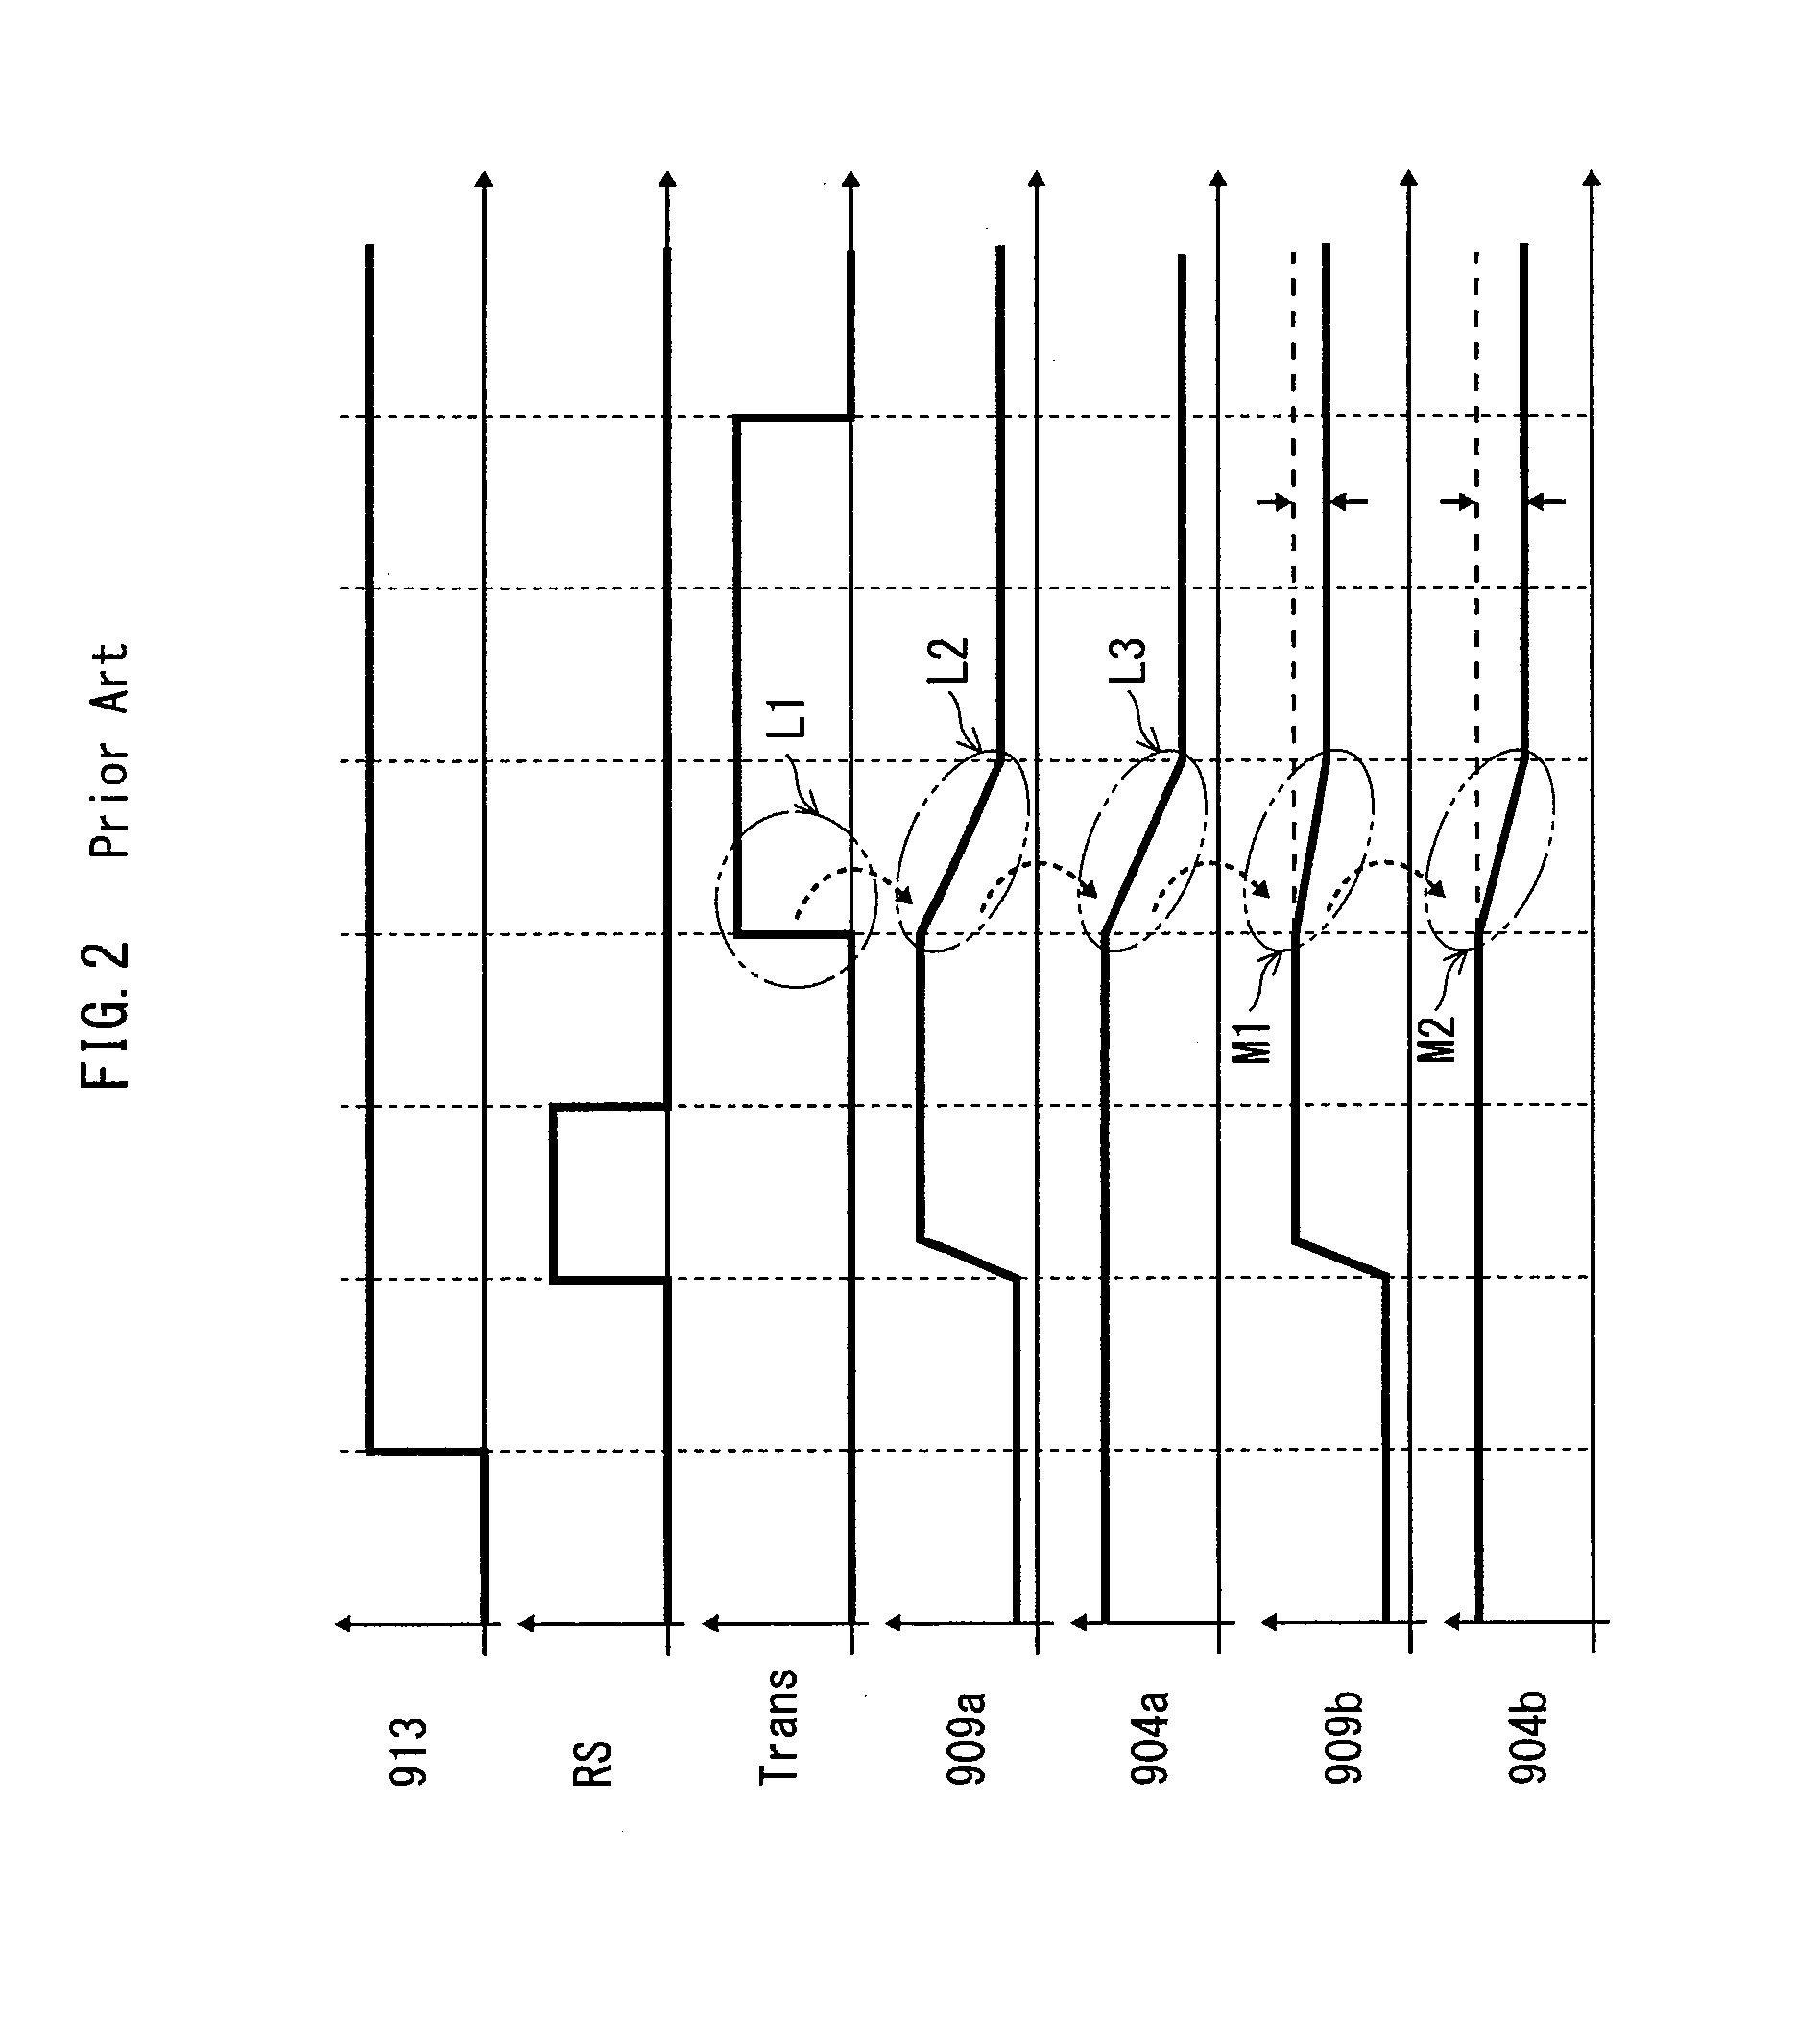 Solid state imaging device capable of parallel reading of data from a plurality of pixel cells